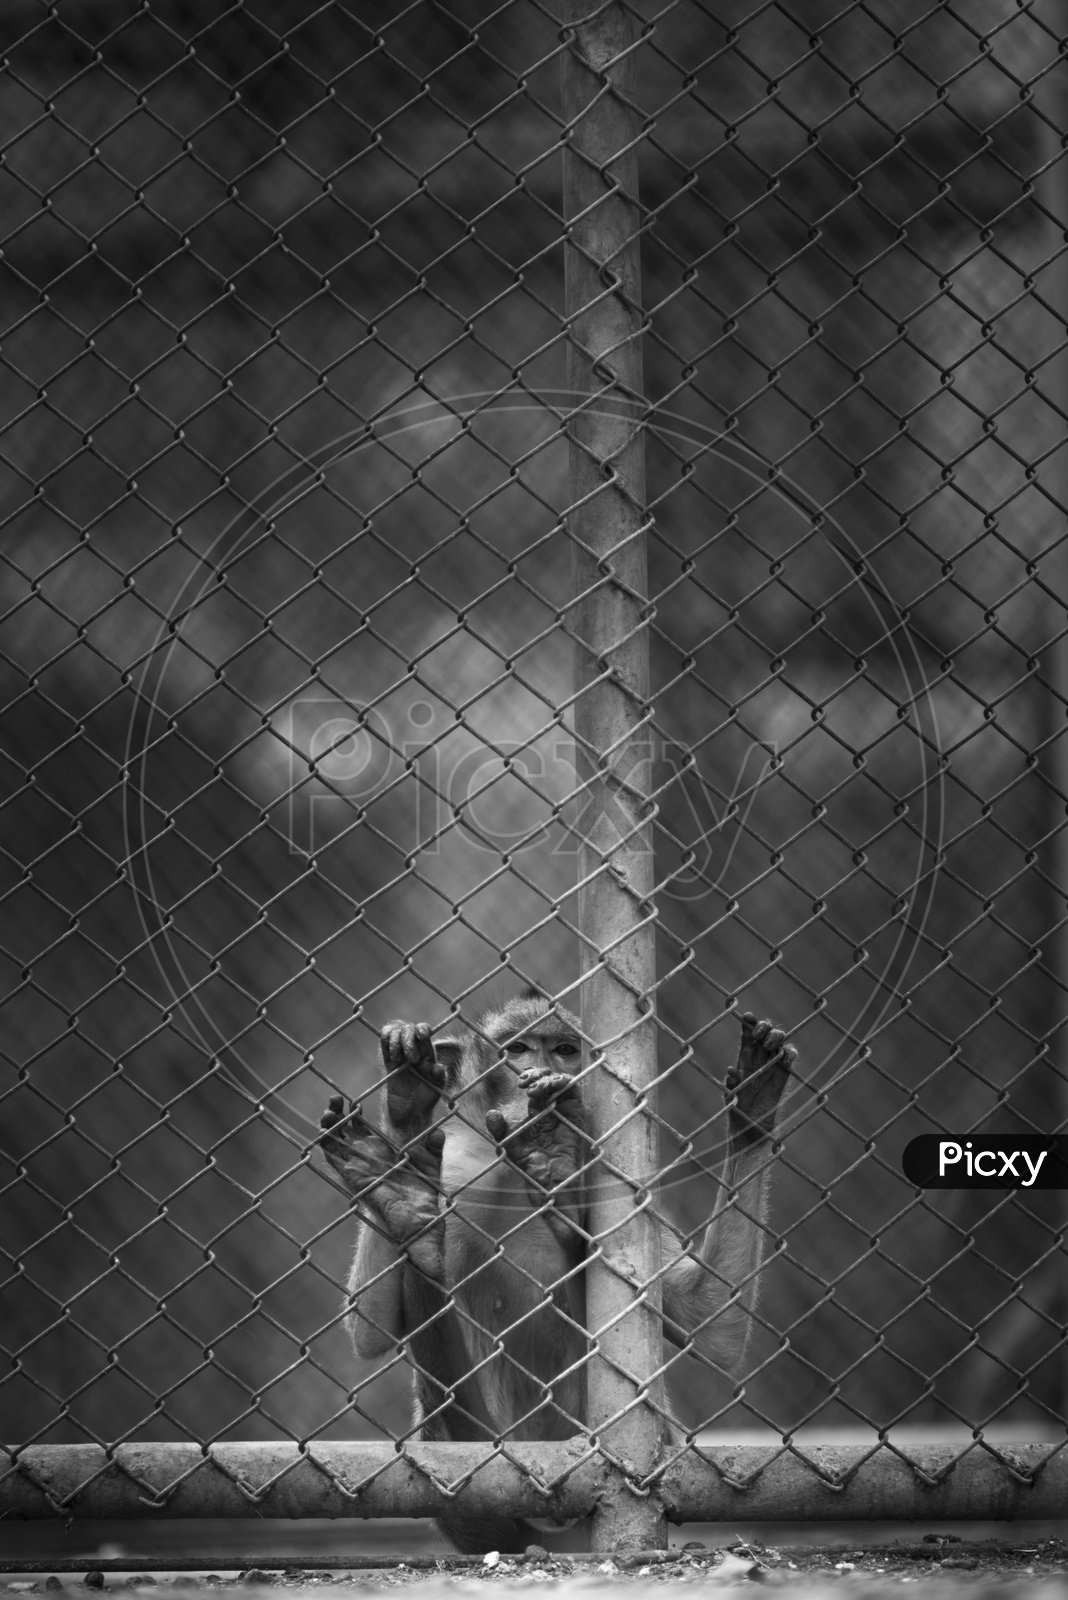 Young Macaque In a Zoo Cage